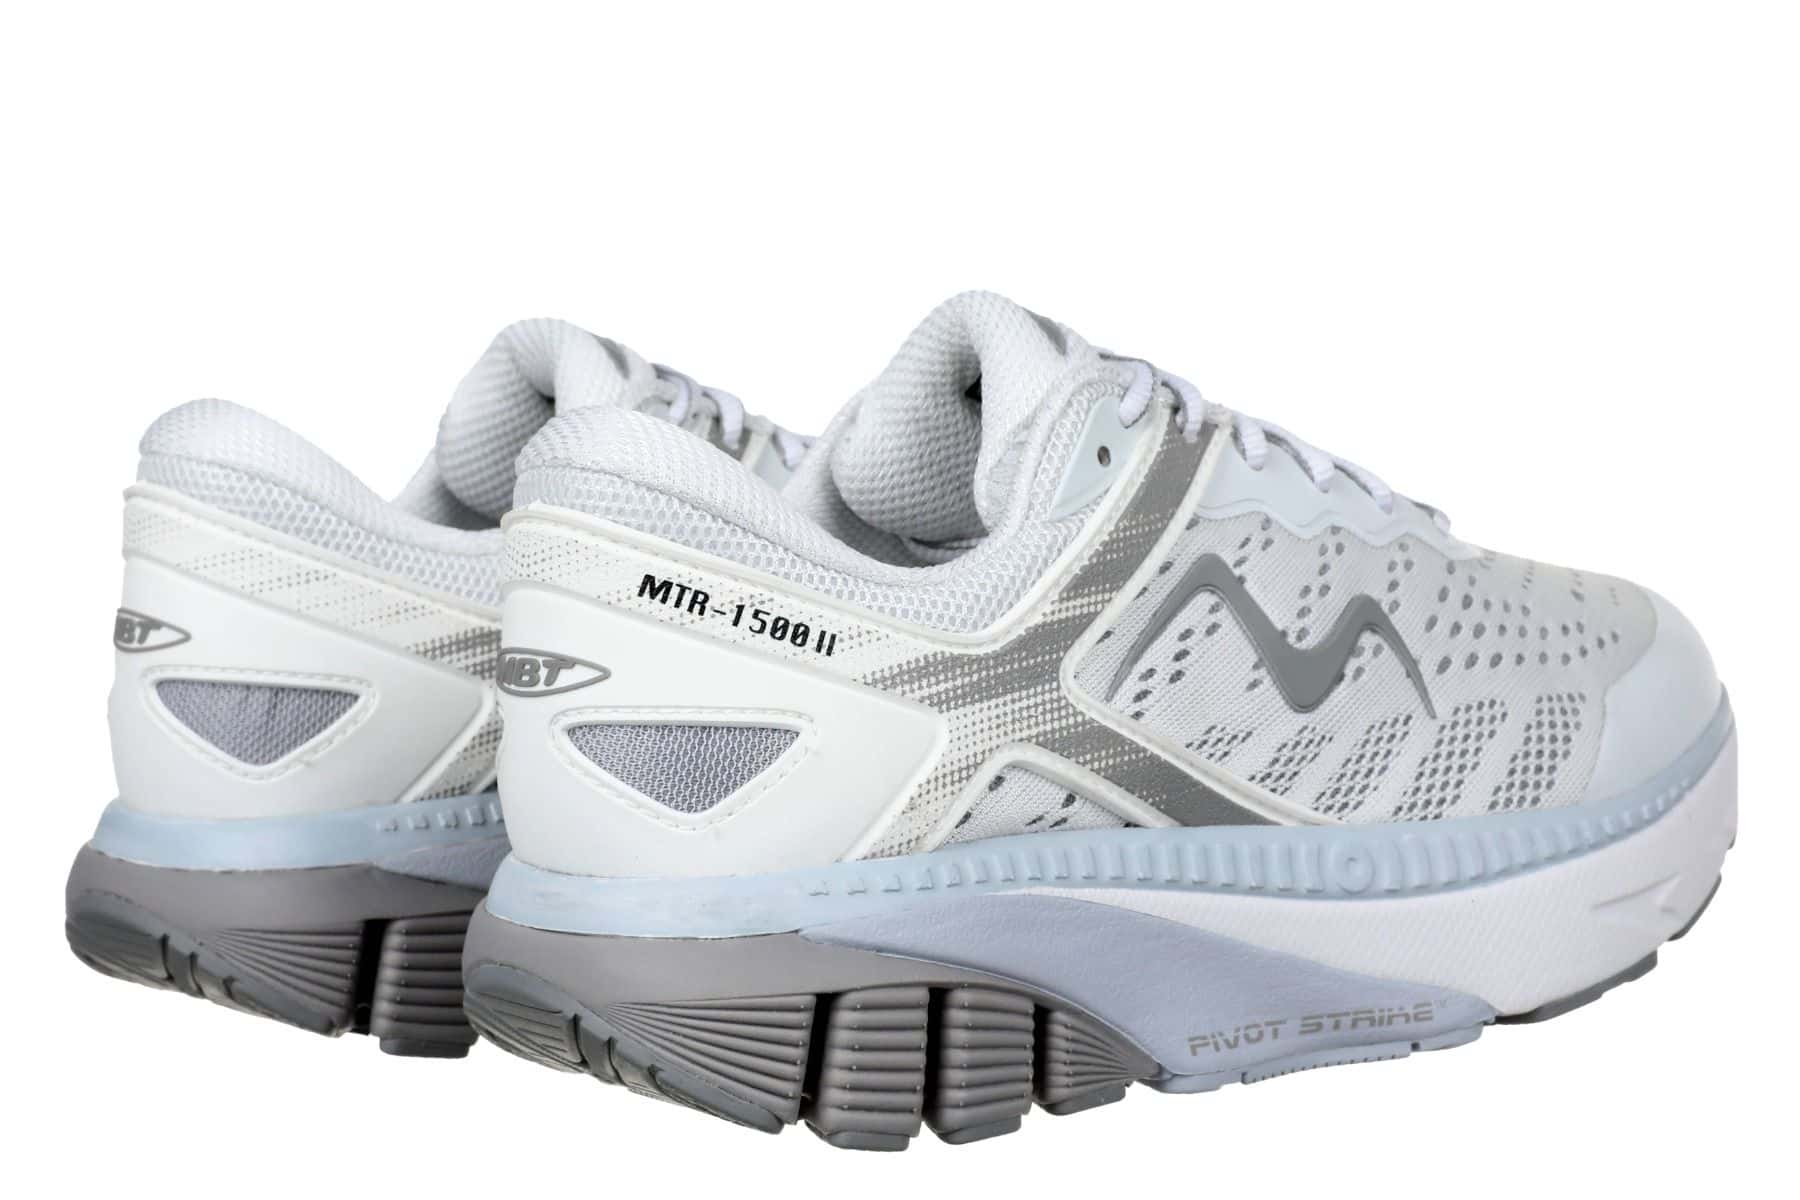 MBT MTR-1500 II LACE UP WOMEN´S RUNNING SHOES